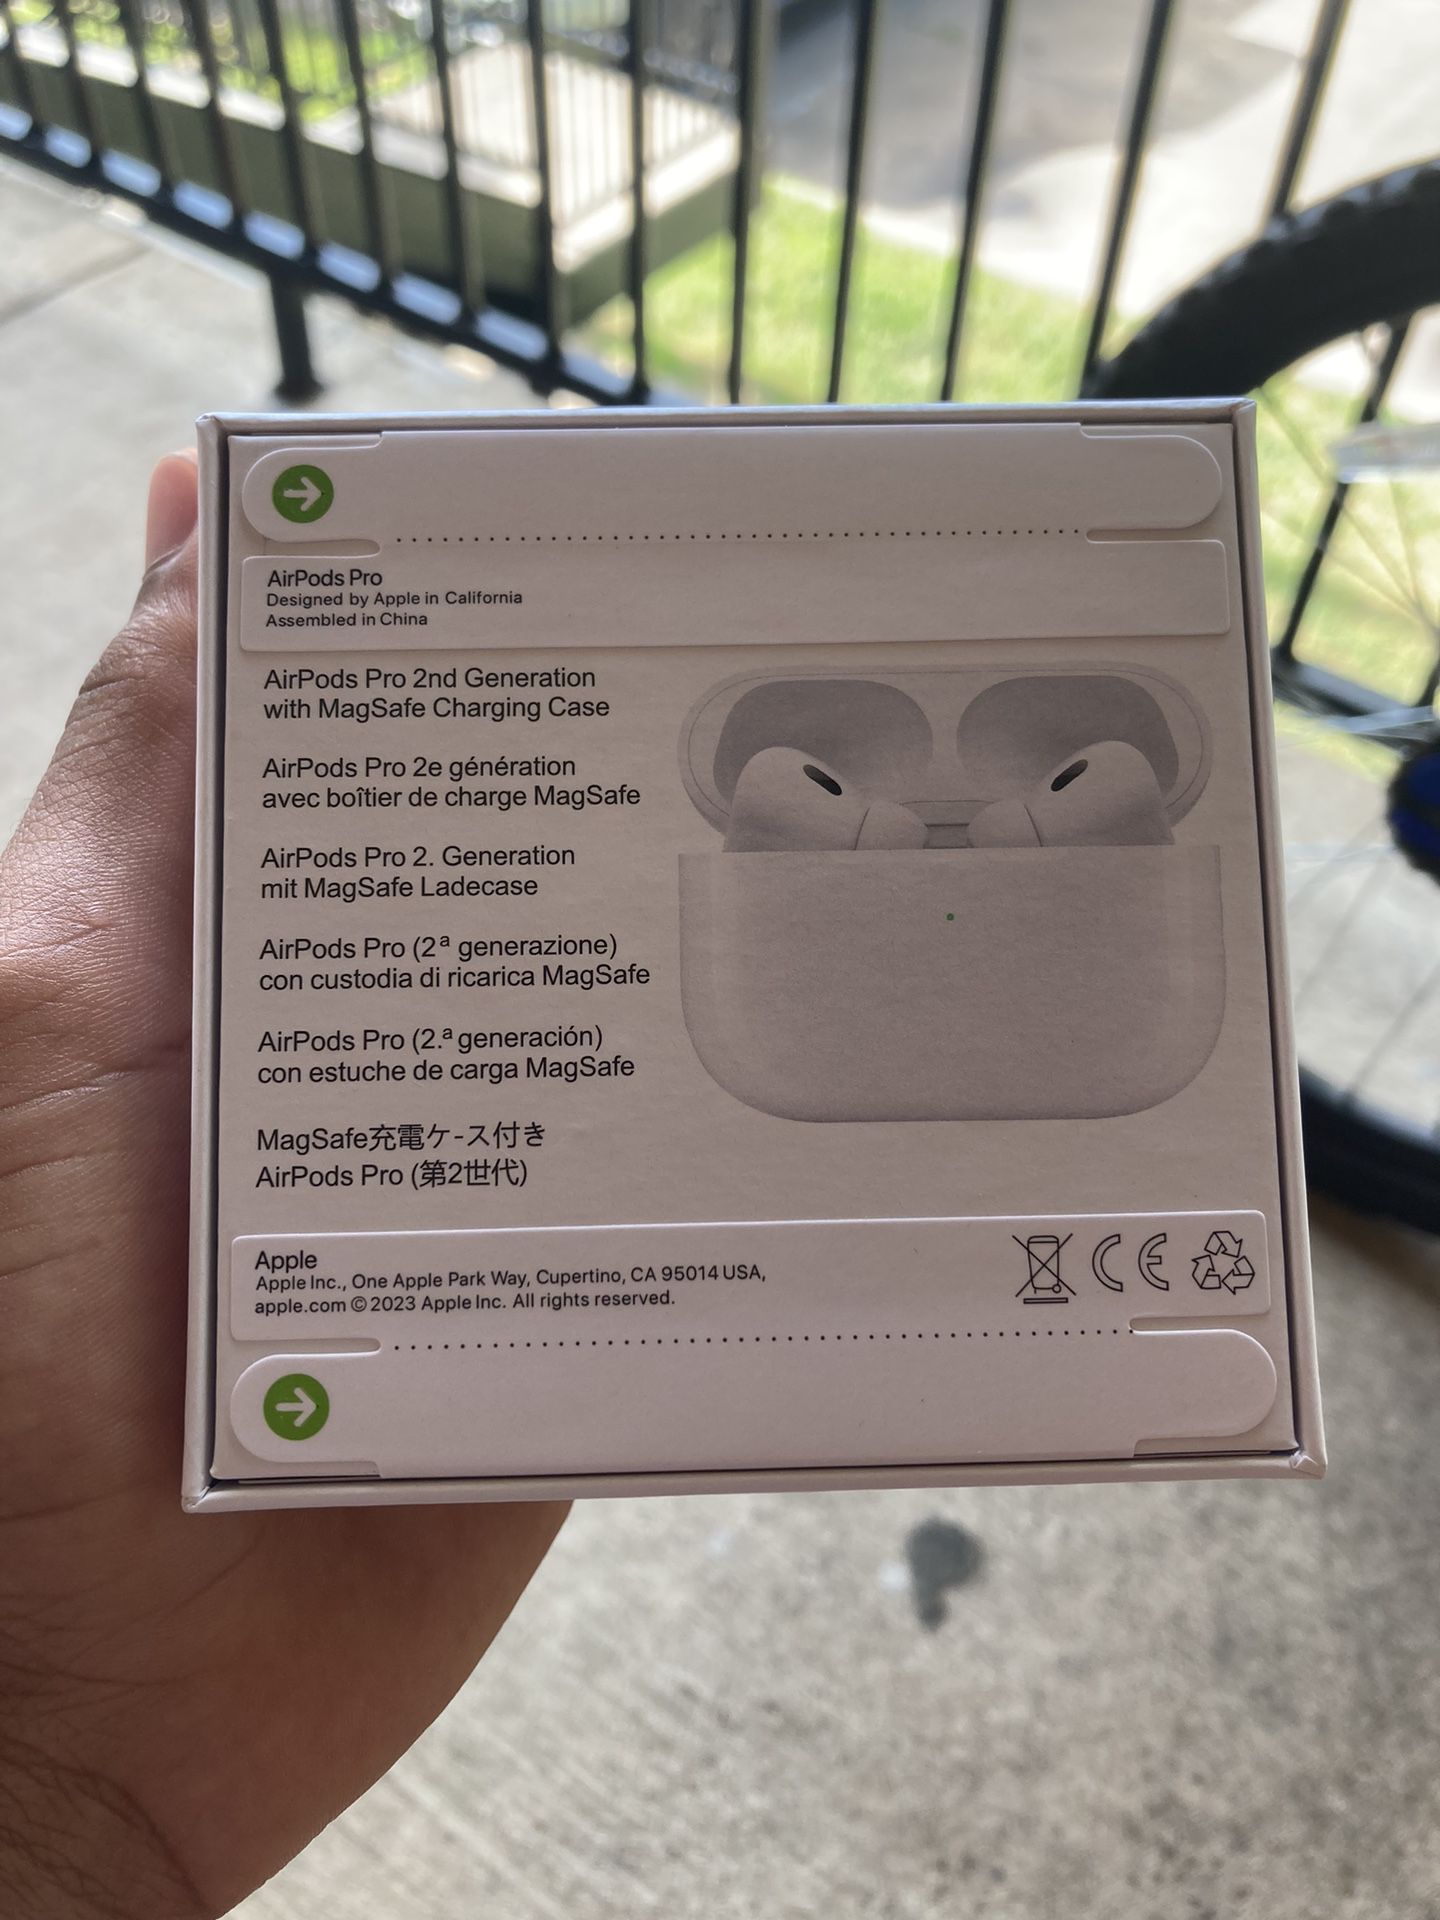 Apple Airpods pro 2nd generation with MagSafe wireless charging